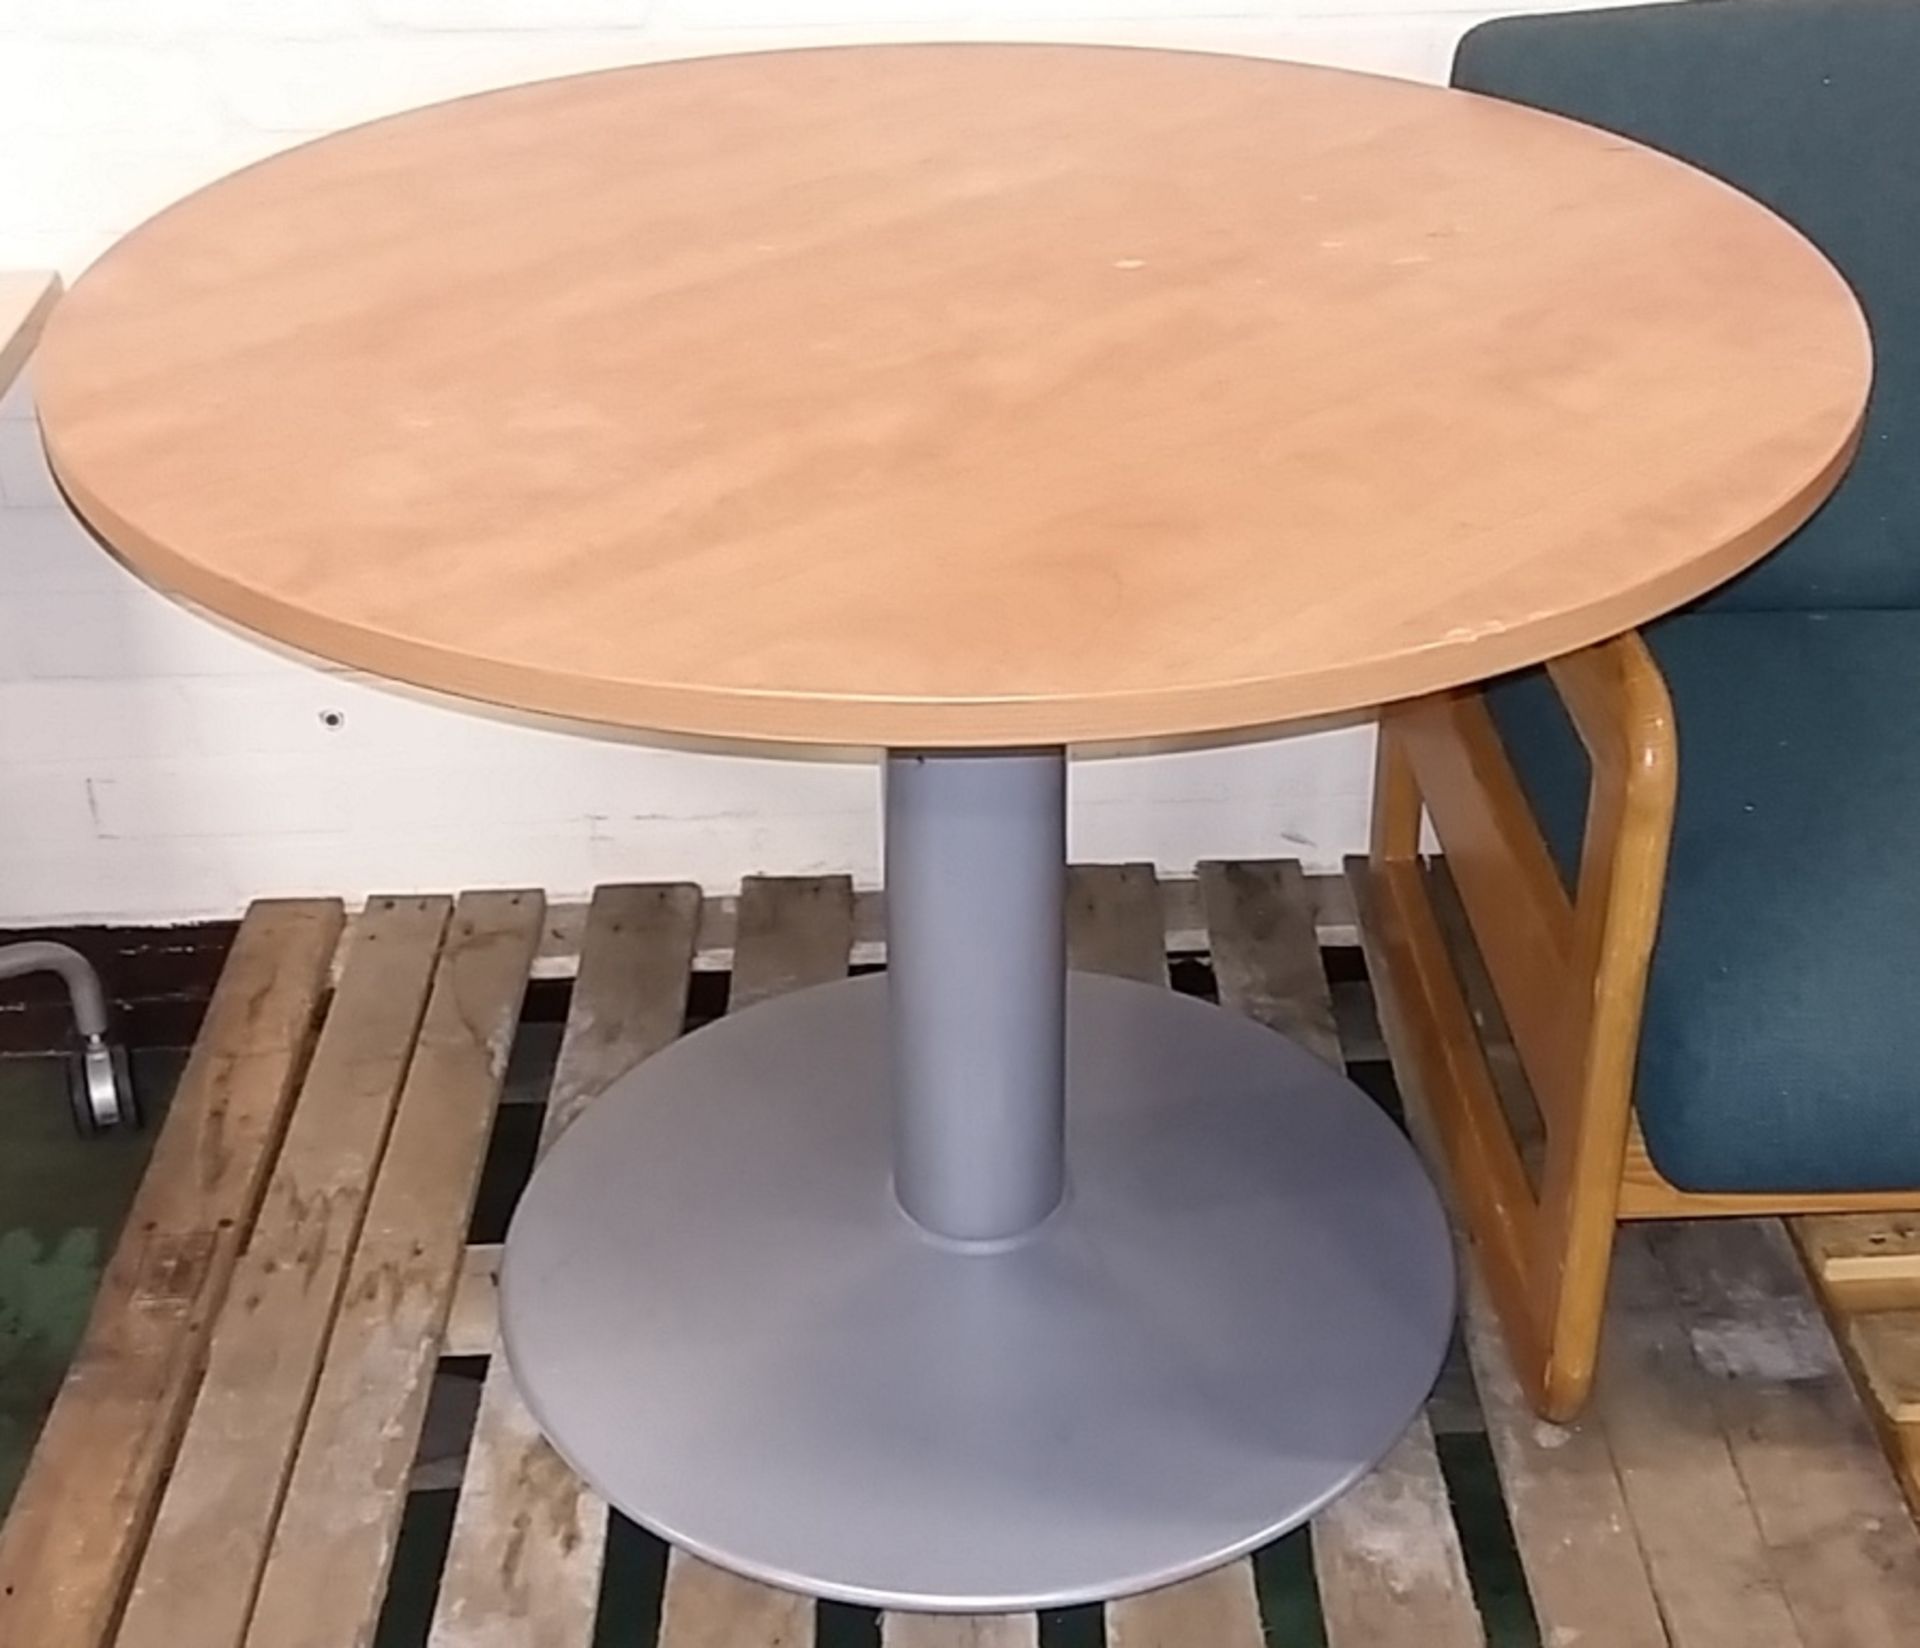 Round topped table